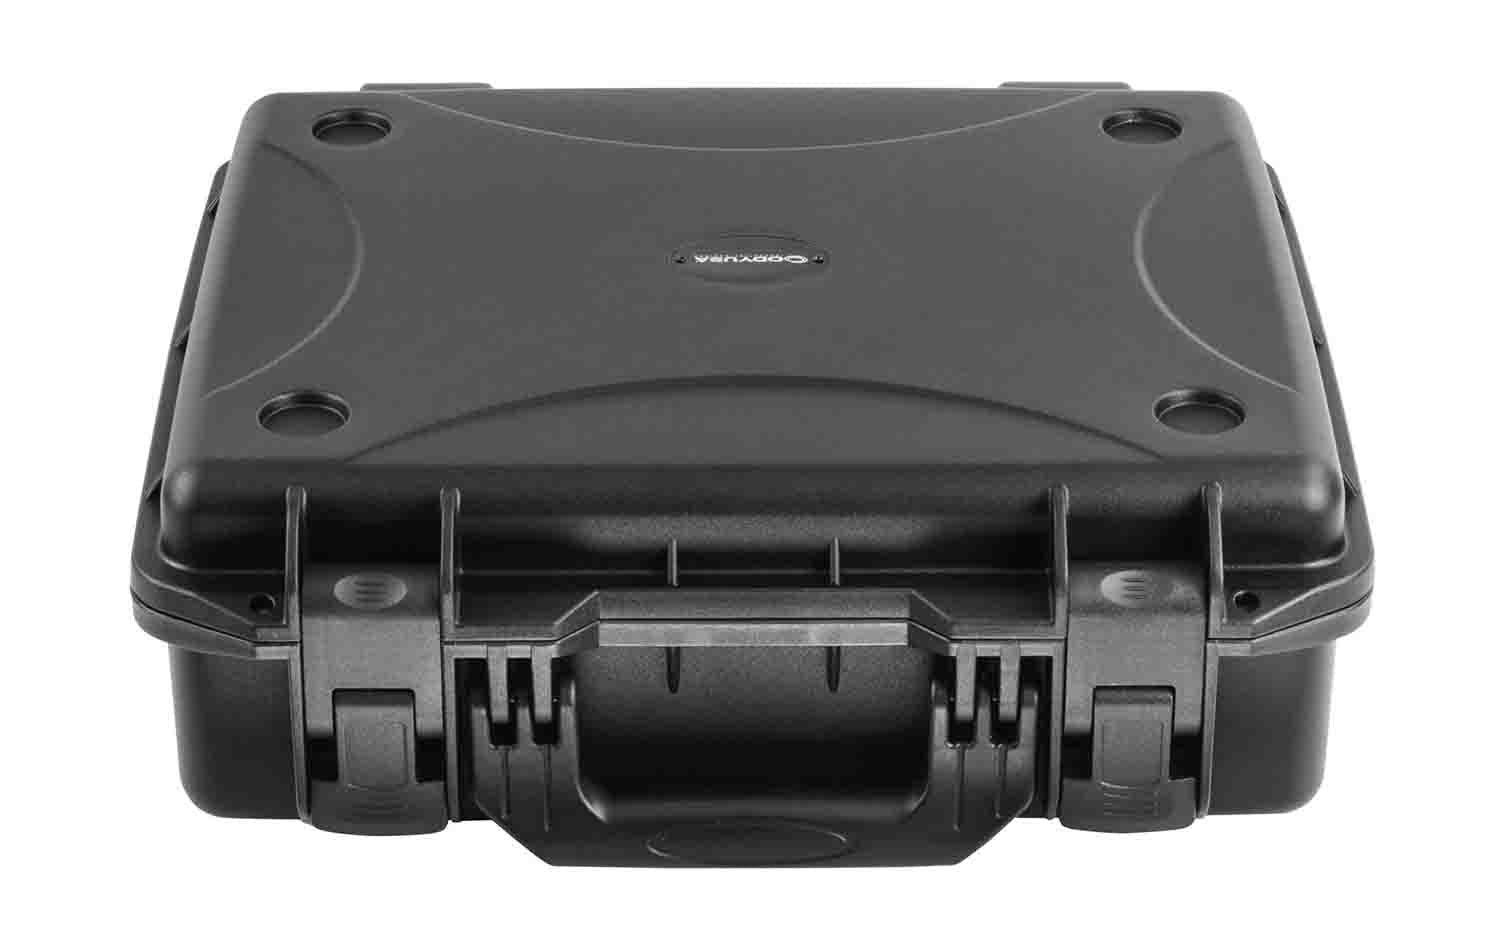 Odyssey VU161305NF Vulcan Injection-Molded Utility Case - 17 x 13.25 x 3.75" Interior - Hollywood DJ